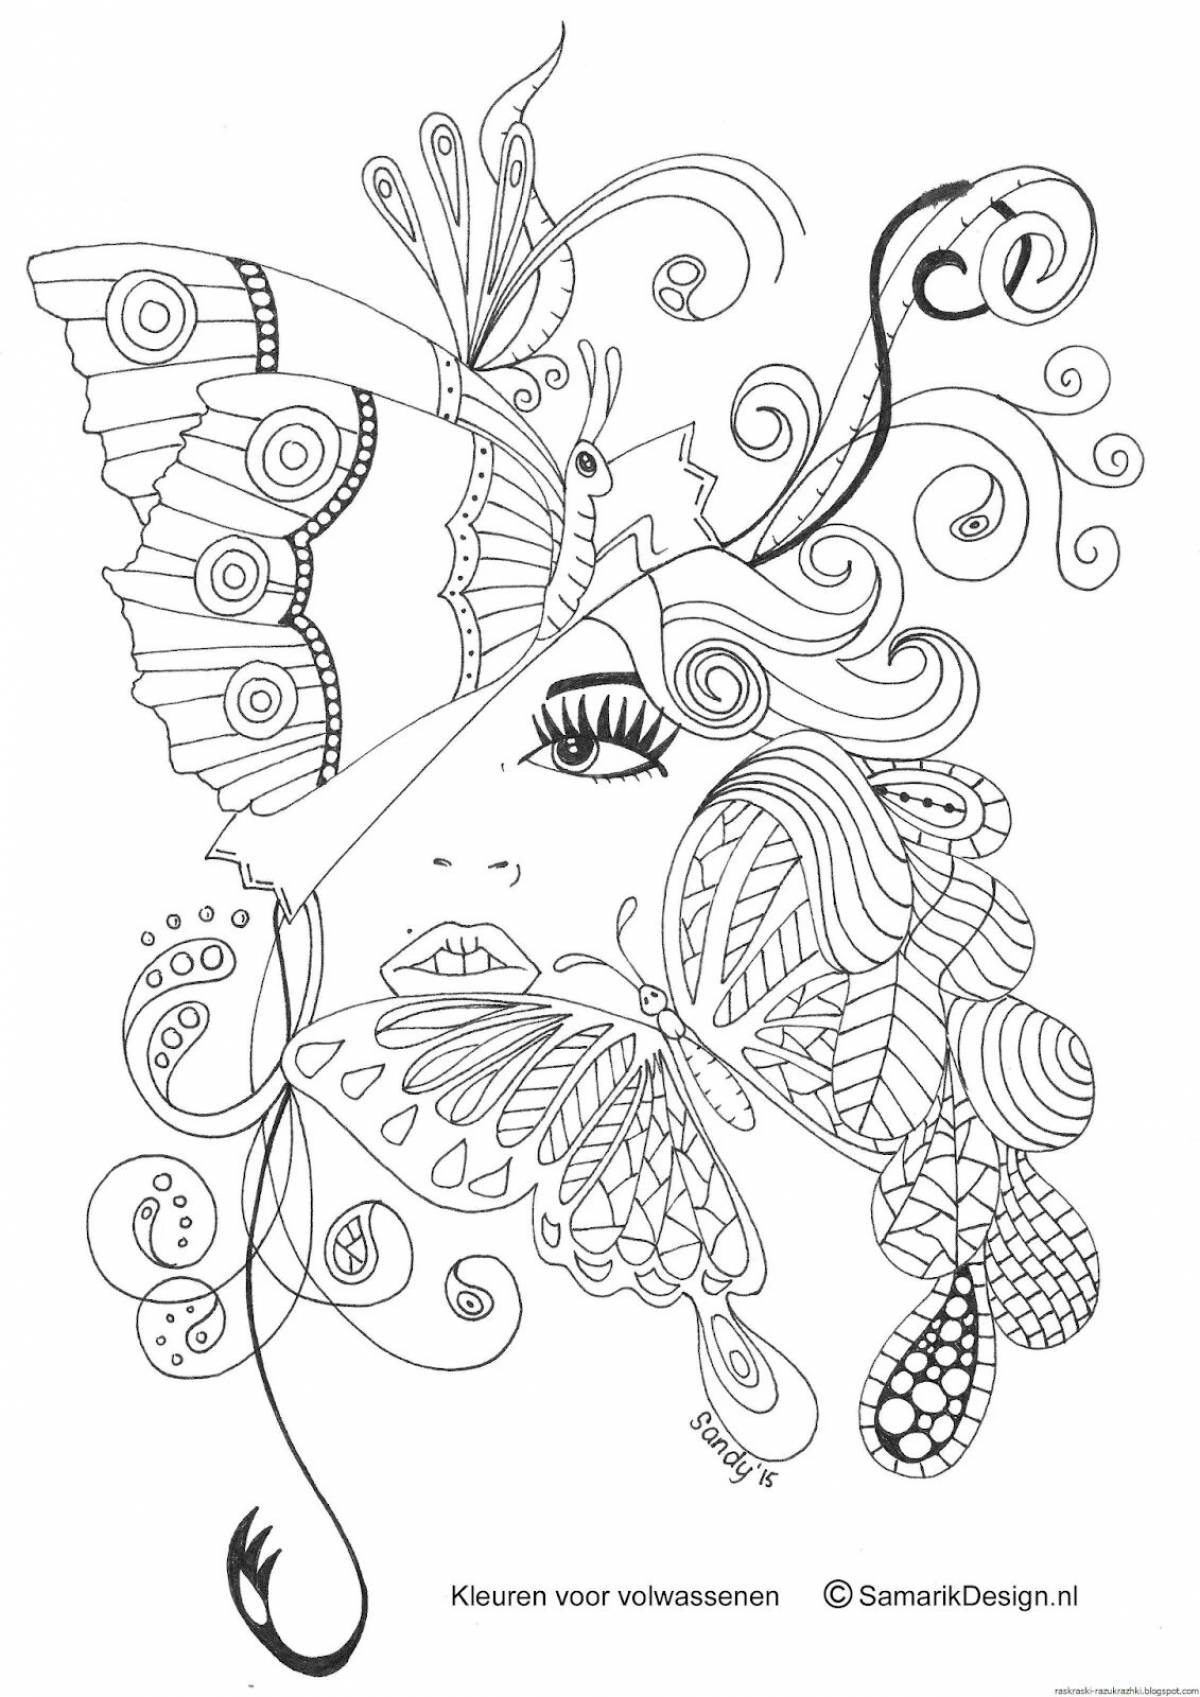 Playful coloring book relaxation antistress for adults